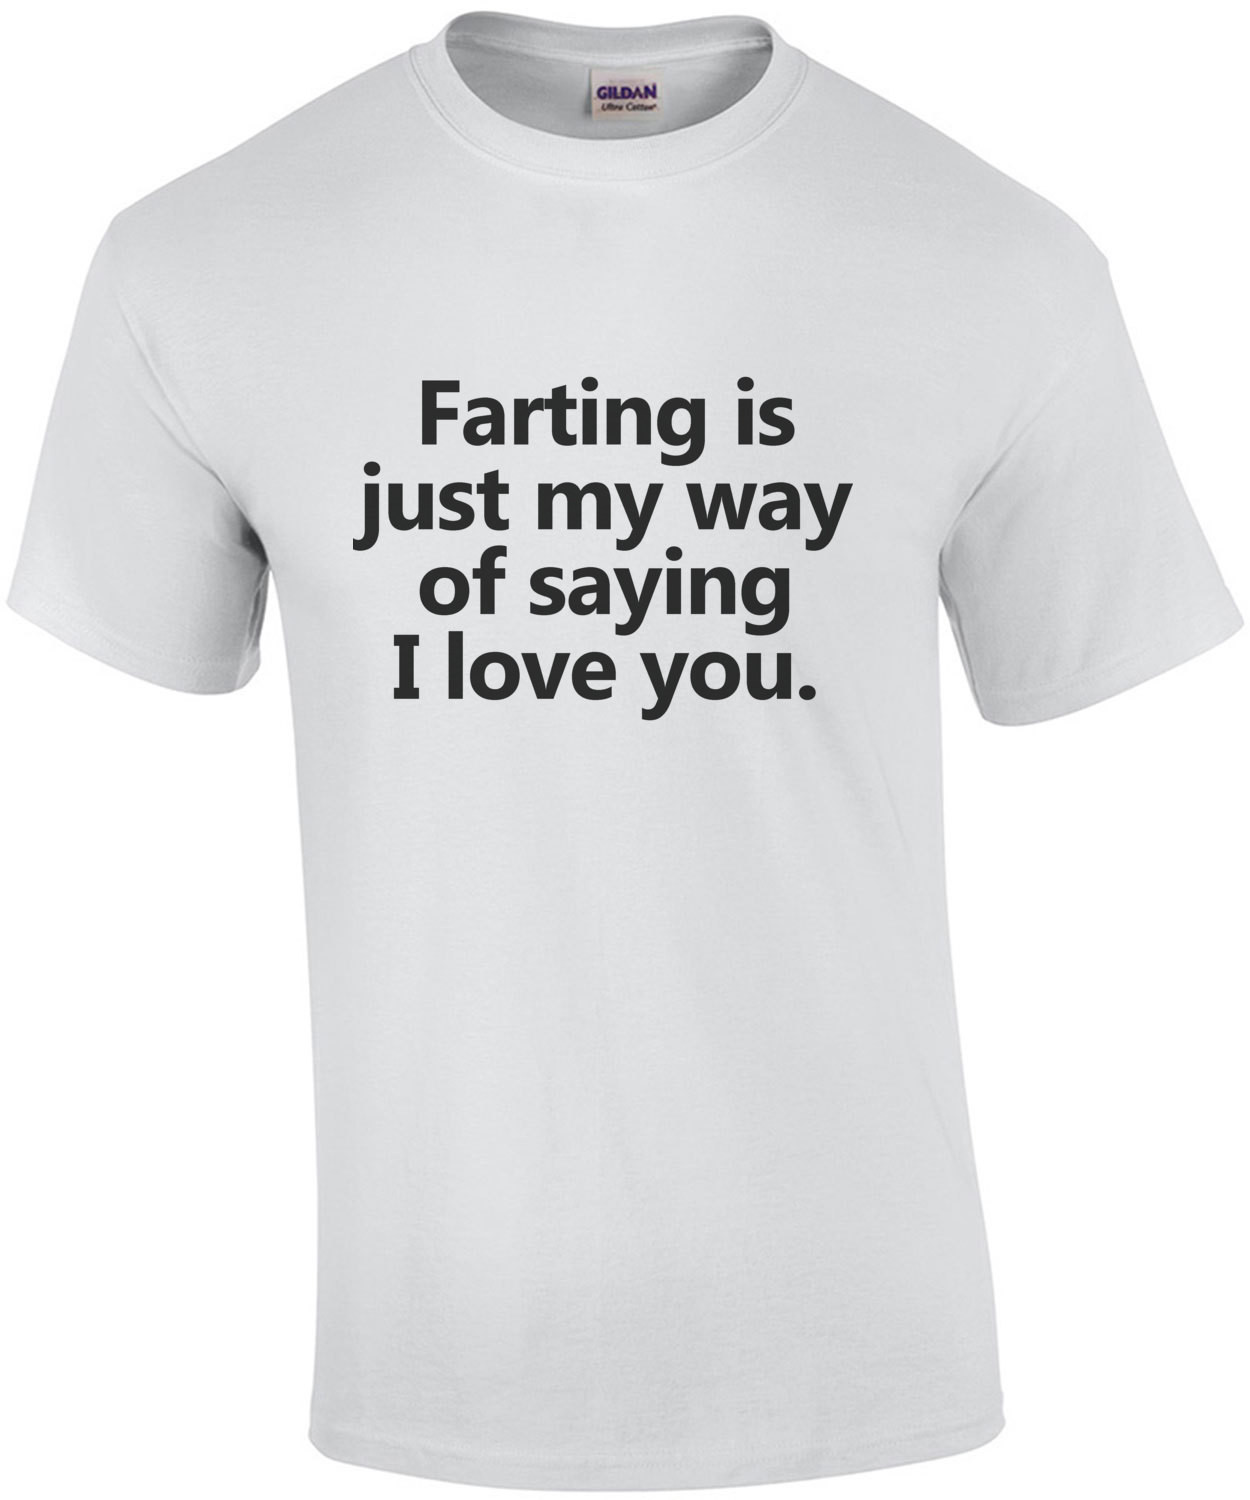 Farting is just my way of saying I love you. Funny T-Shirt